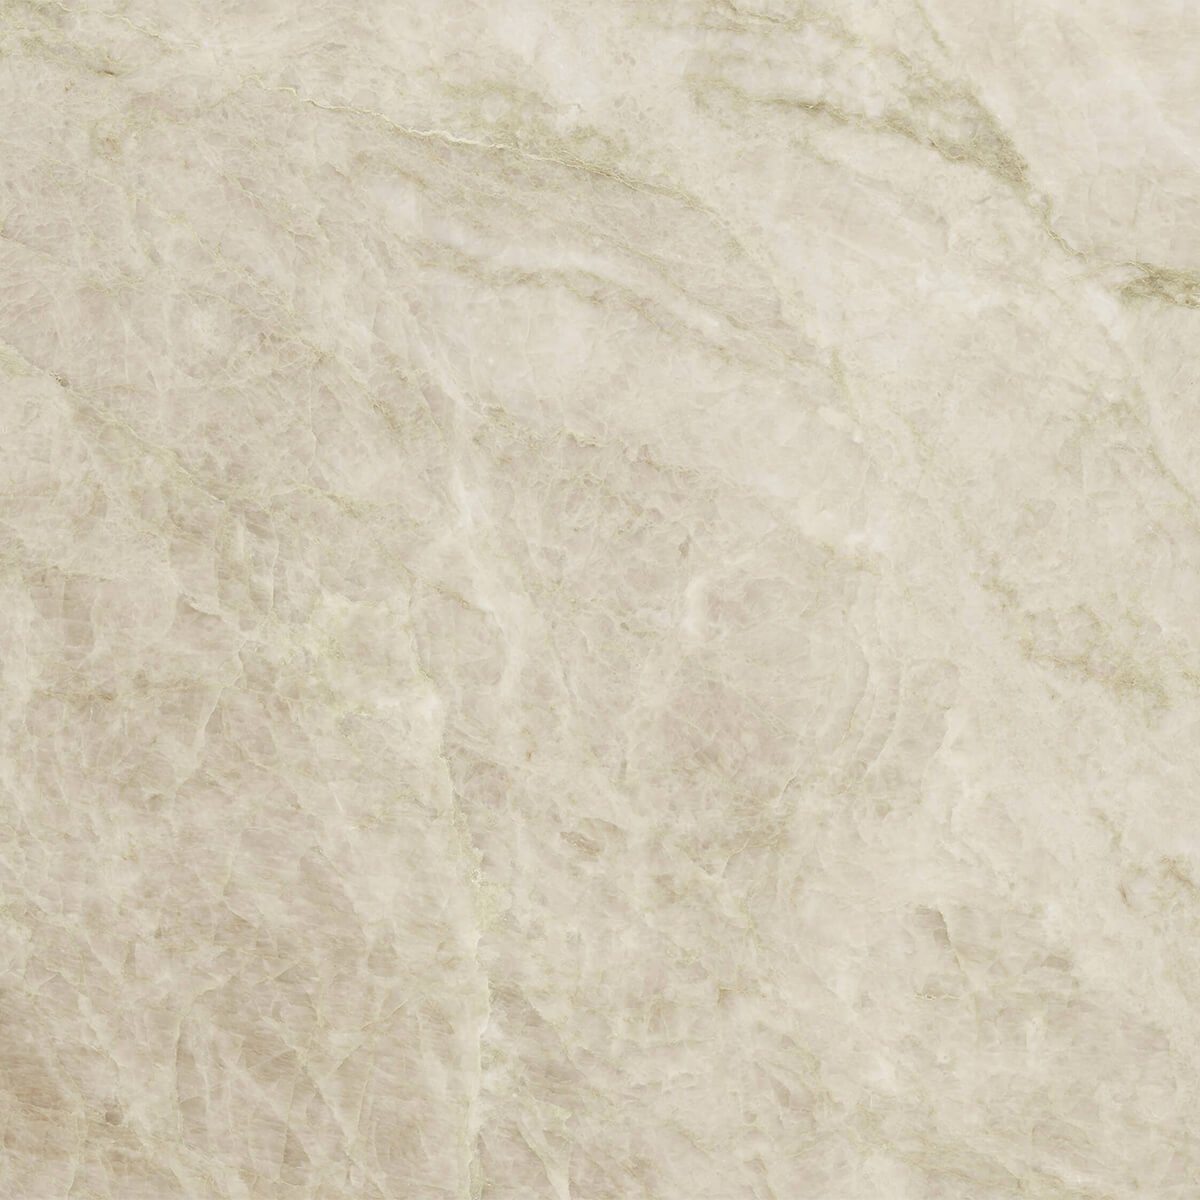 Light structured marble